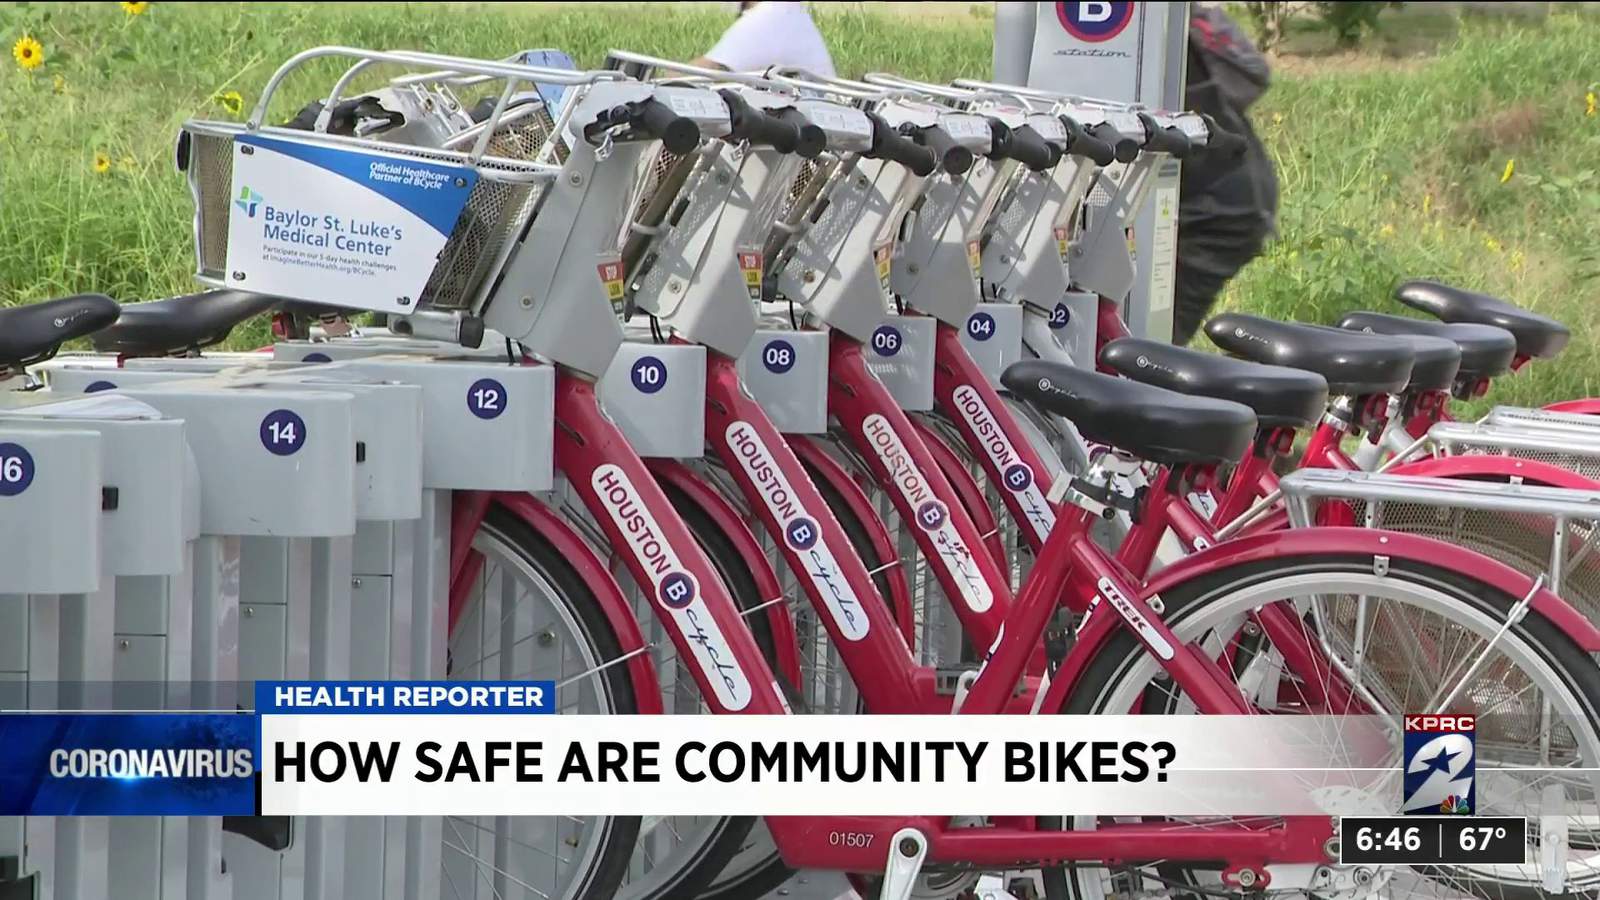 How safe is it to rent bikes during the pandemic?